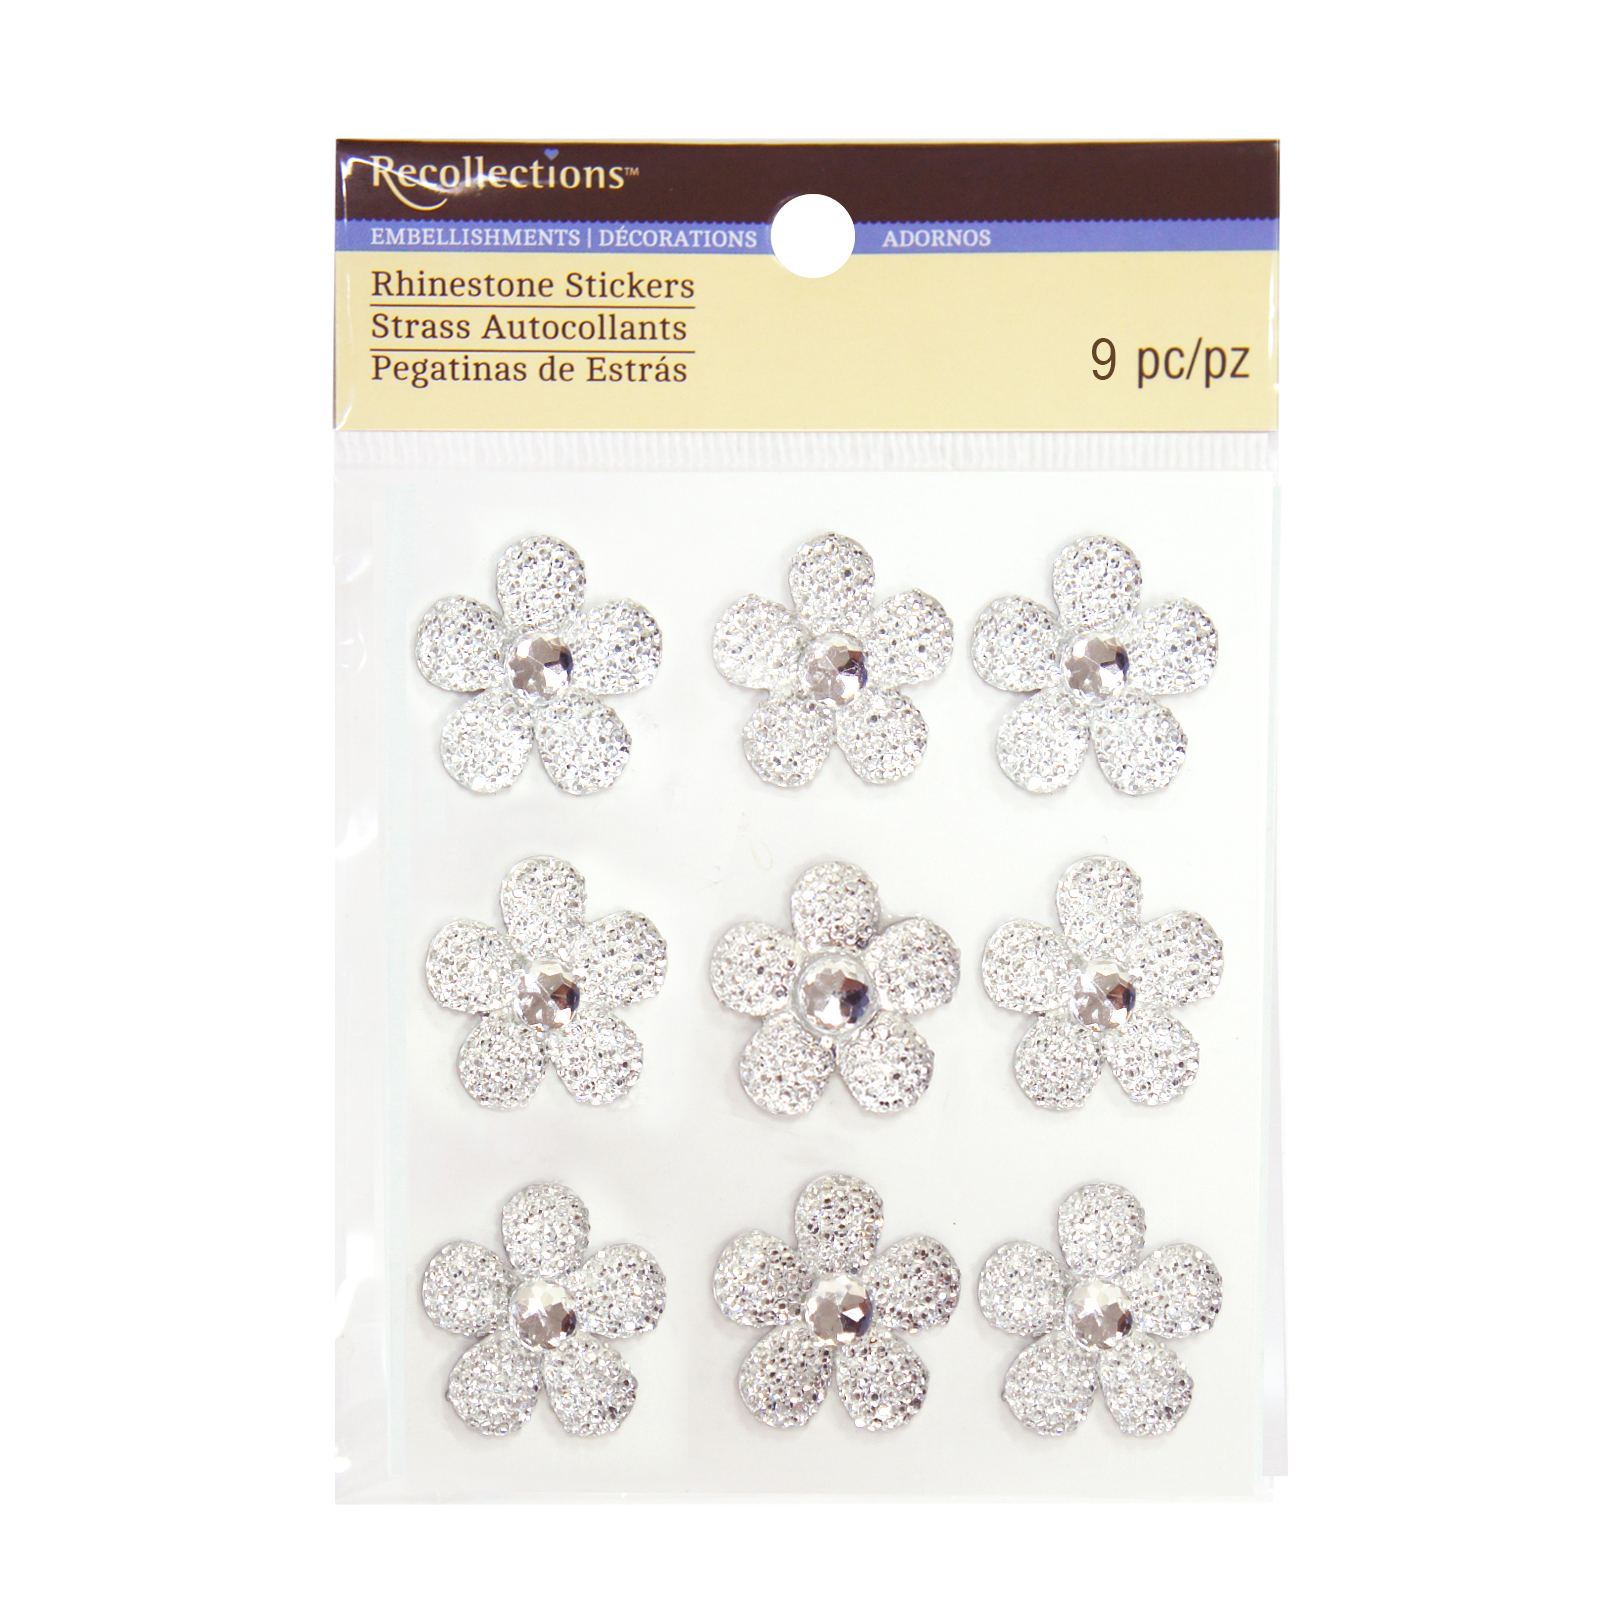 recollections stickers sugar clear flower michaels stone